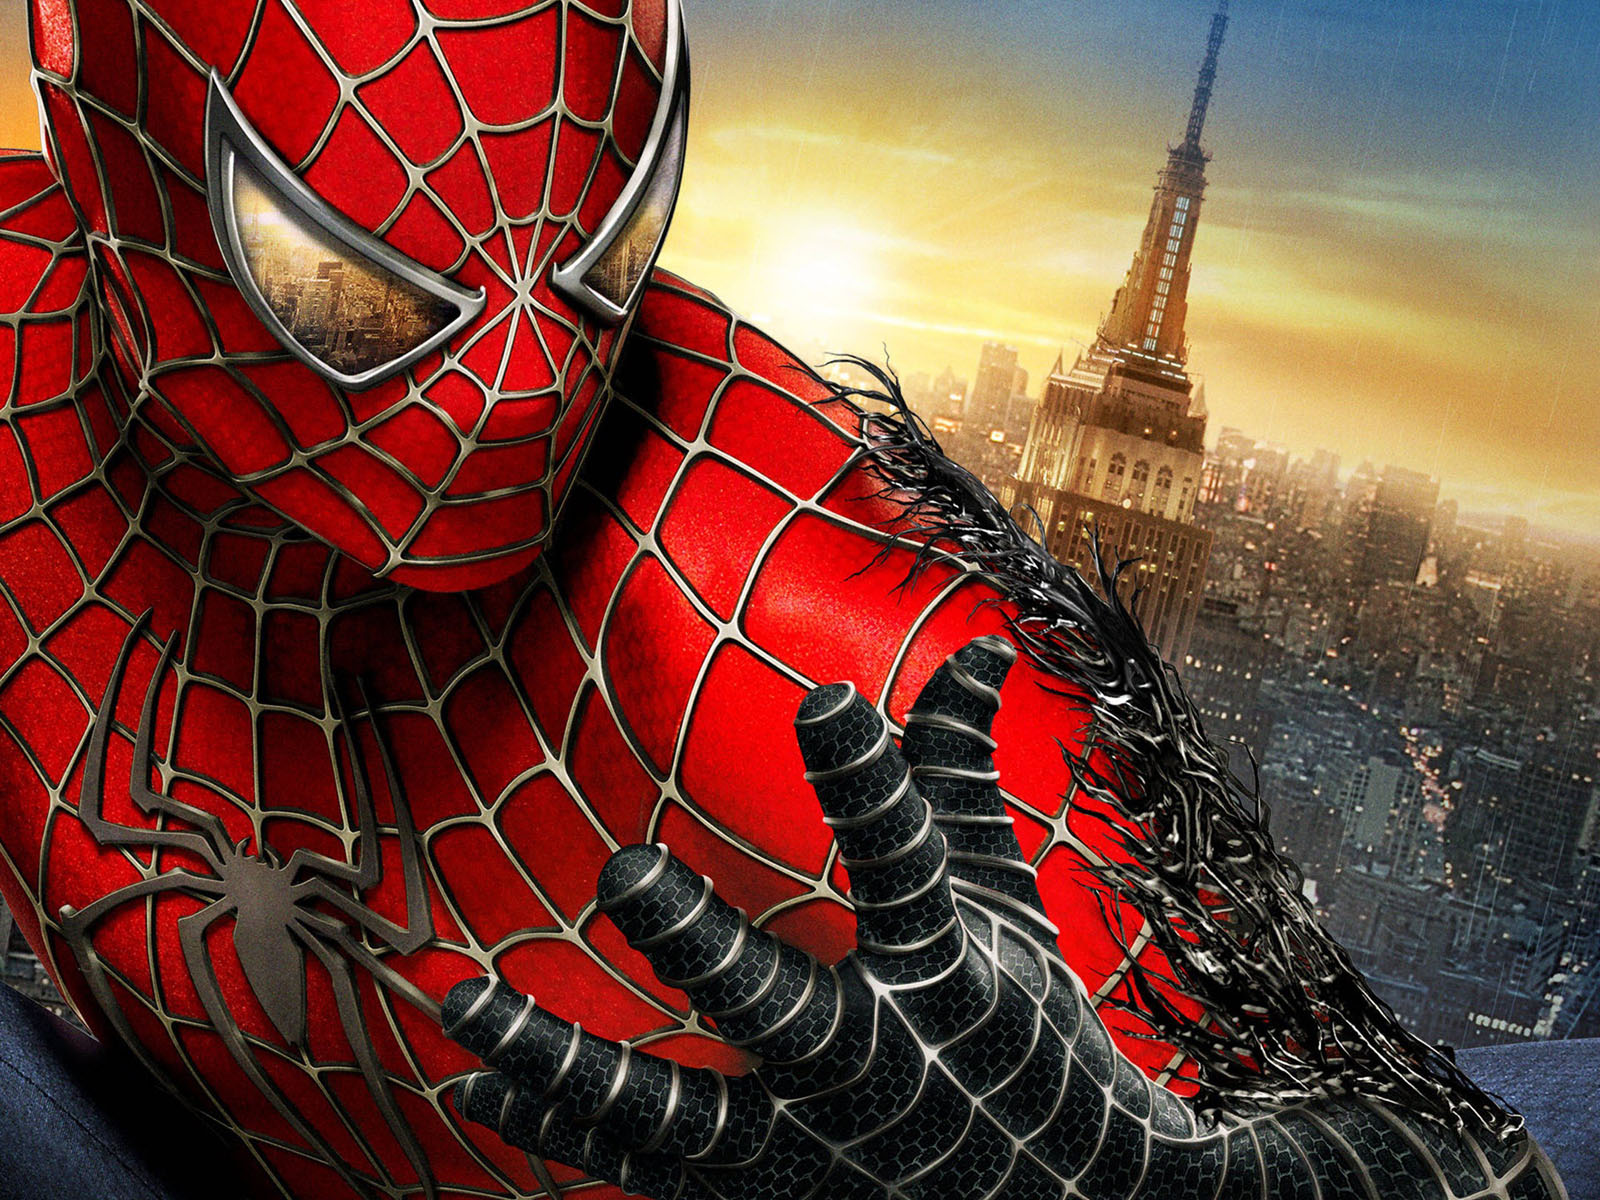 Spiderman HD Wallpaper Pictures In High Definition Or